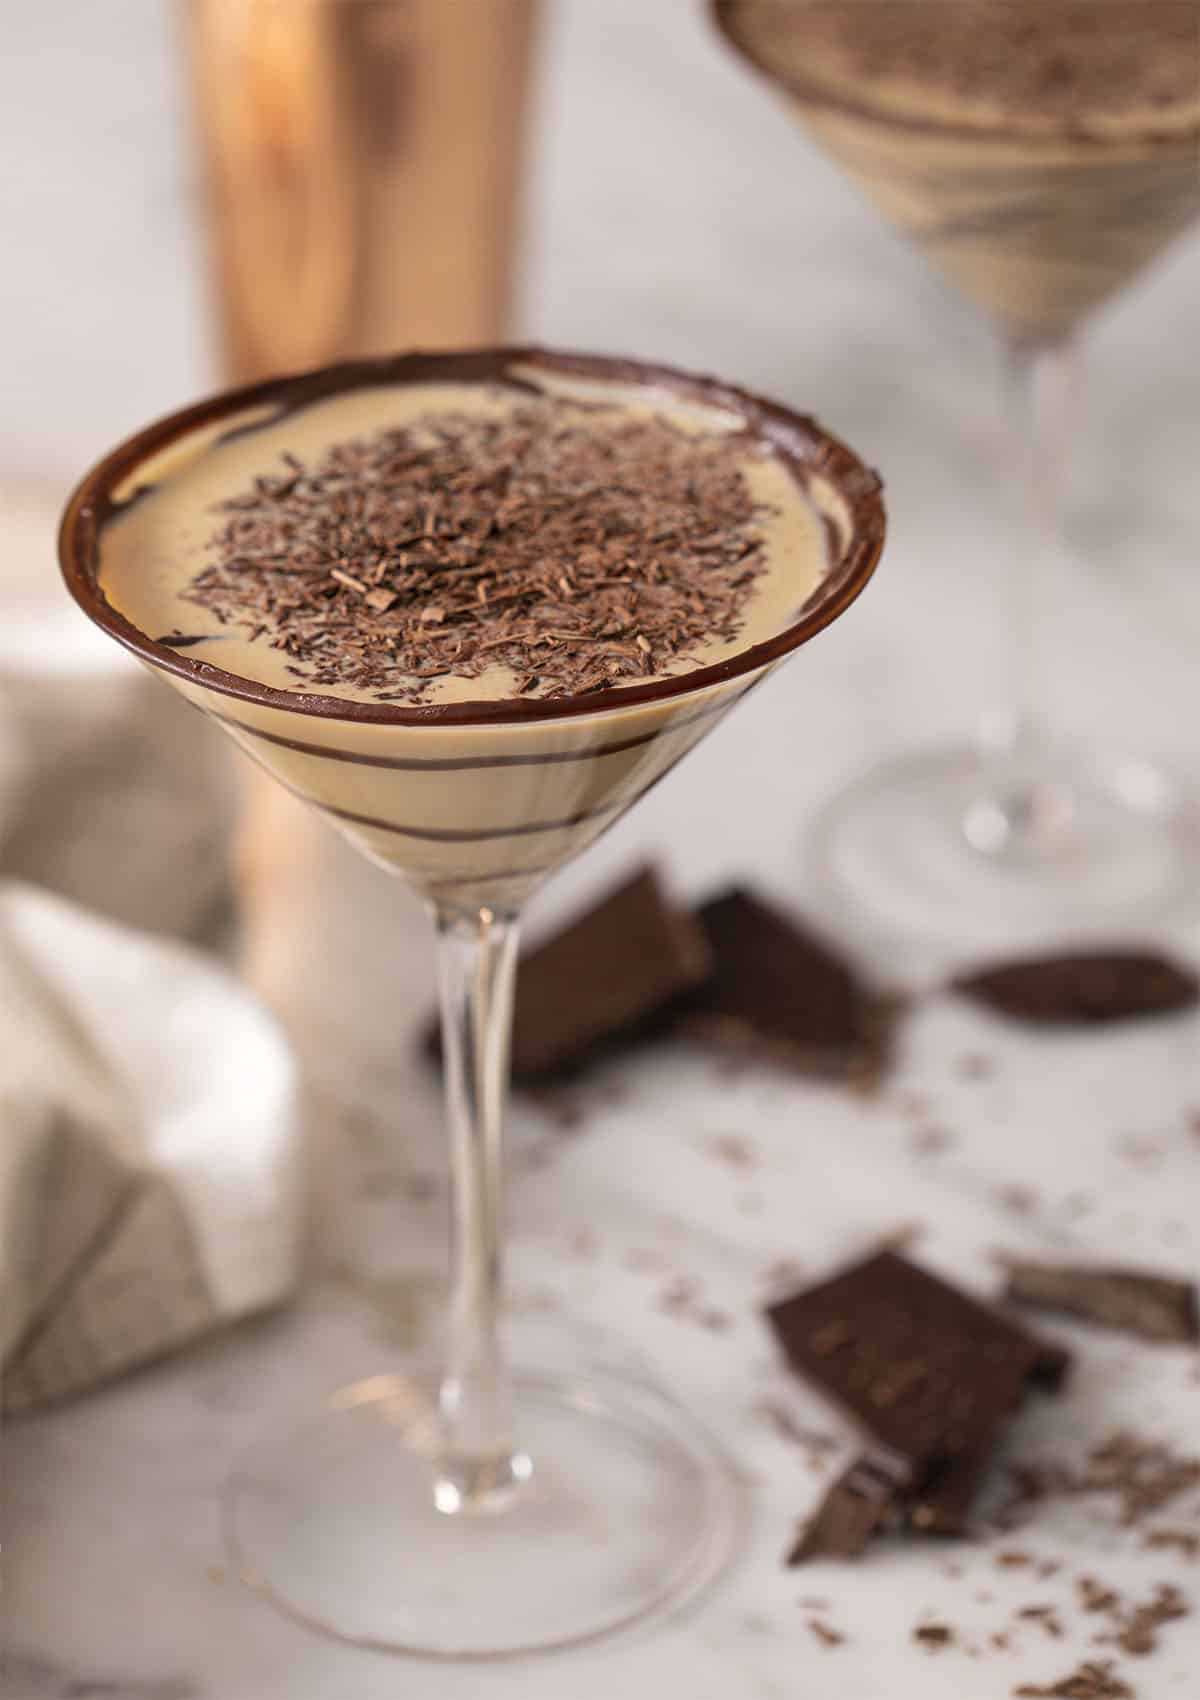 A chocolate martini topped with shaved chocolate.